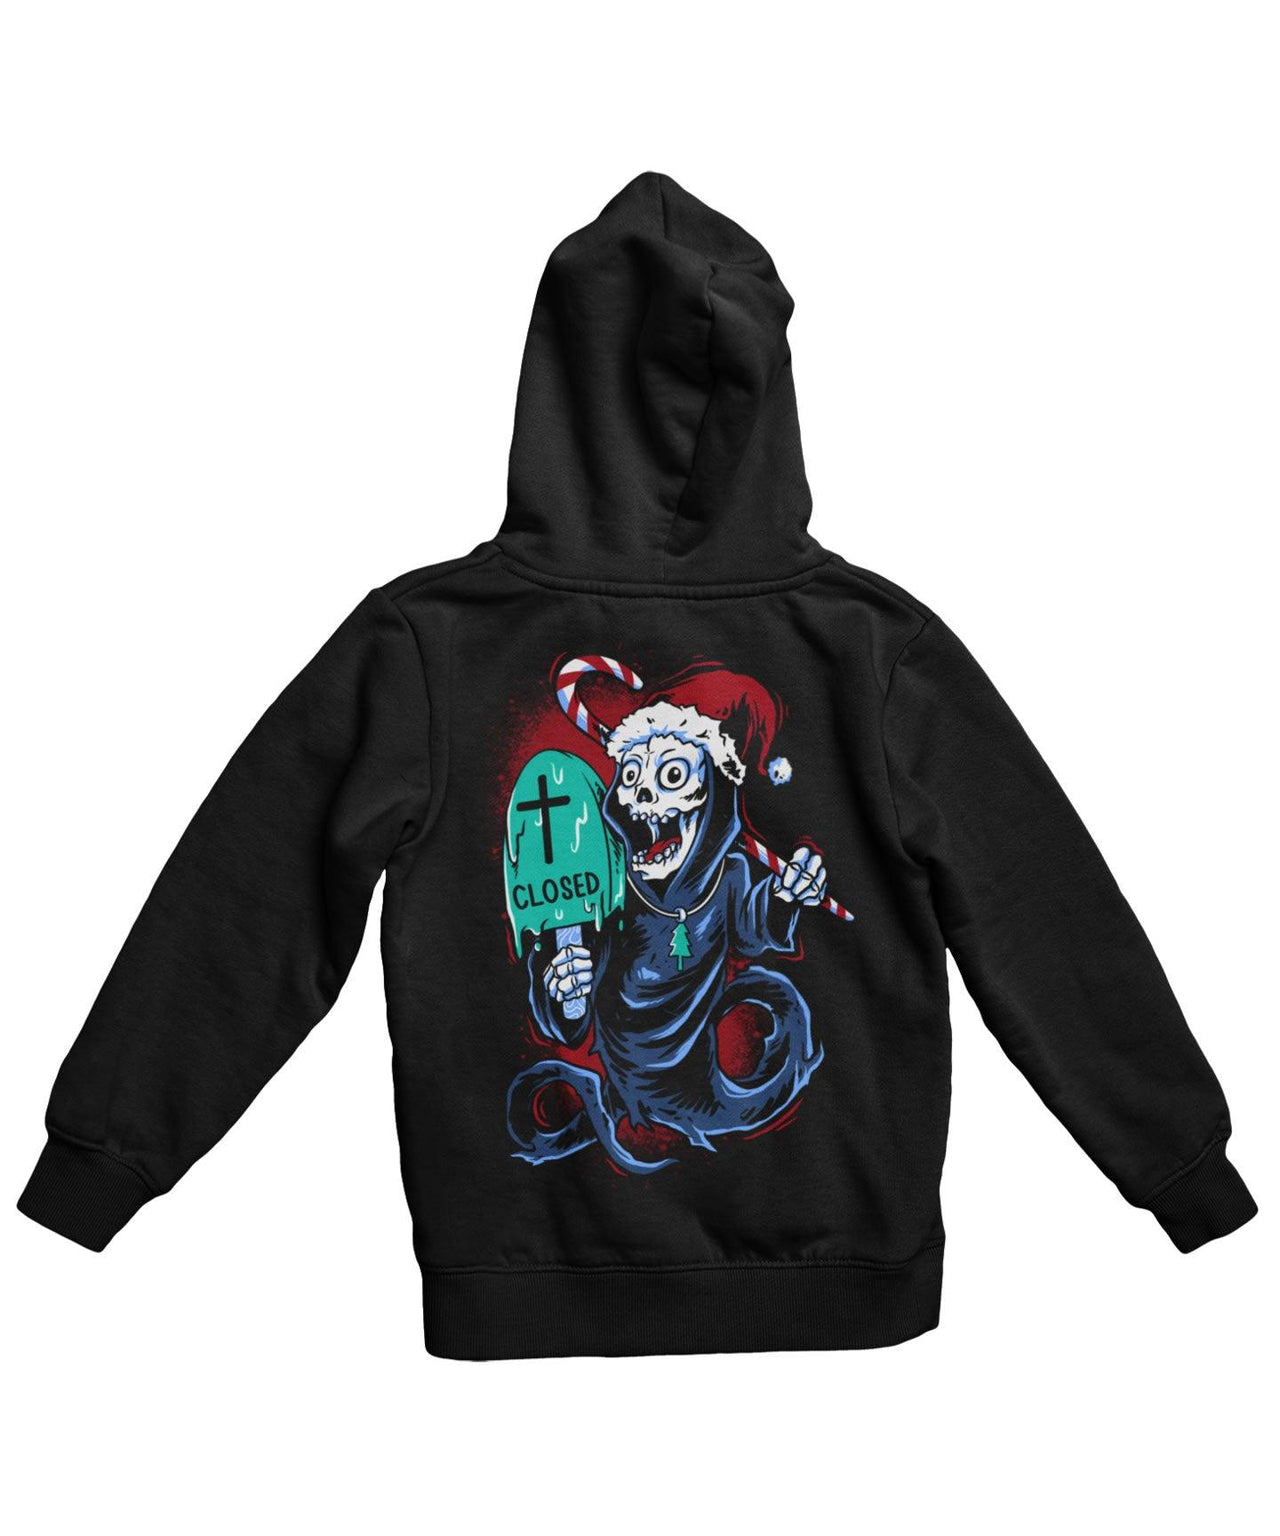 Death Free Day Of Santa Back Printed Christmas Graphic Hoodie 8Ball